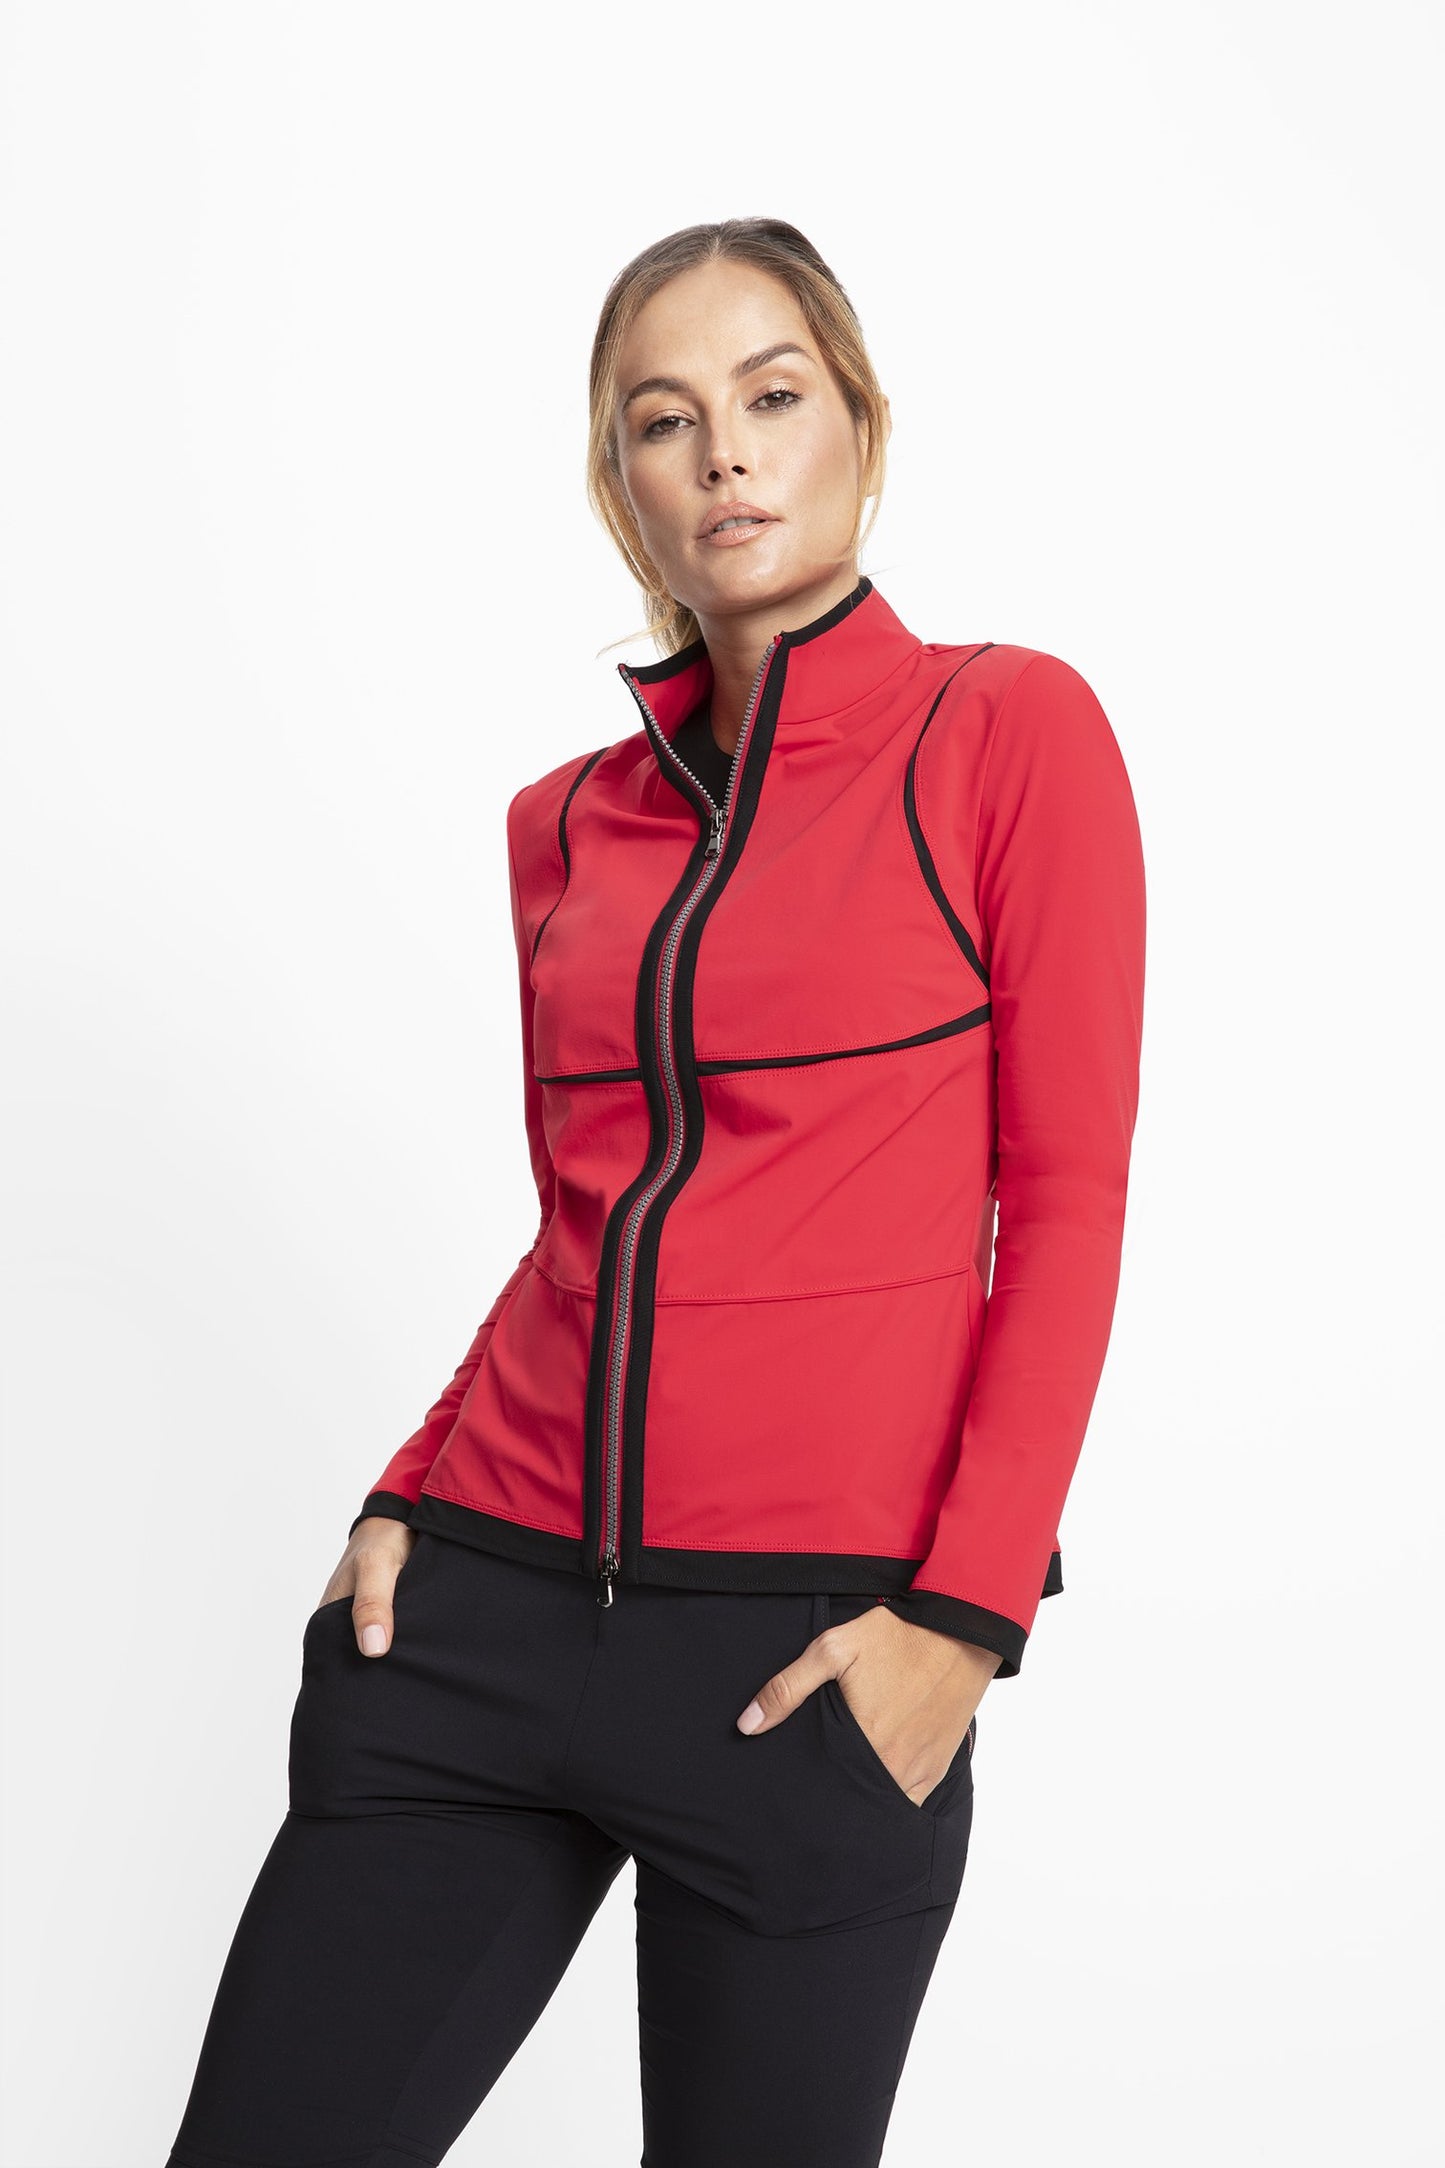 Slim fit High collar that can be worn folded or zipped into a funnel neck Two-way zip front closure Full-length sleeves Side zip pockets at hips Mesh insert detailing at the bodice and shoulder Slightly extended length hits just below the waist Wrinkle-resistant, lightweight, easy to pack Imported Super Jersey: 94% polyester / 6% elastane Imported Honiara: 94% polyester / 6% elastane